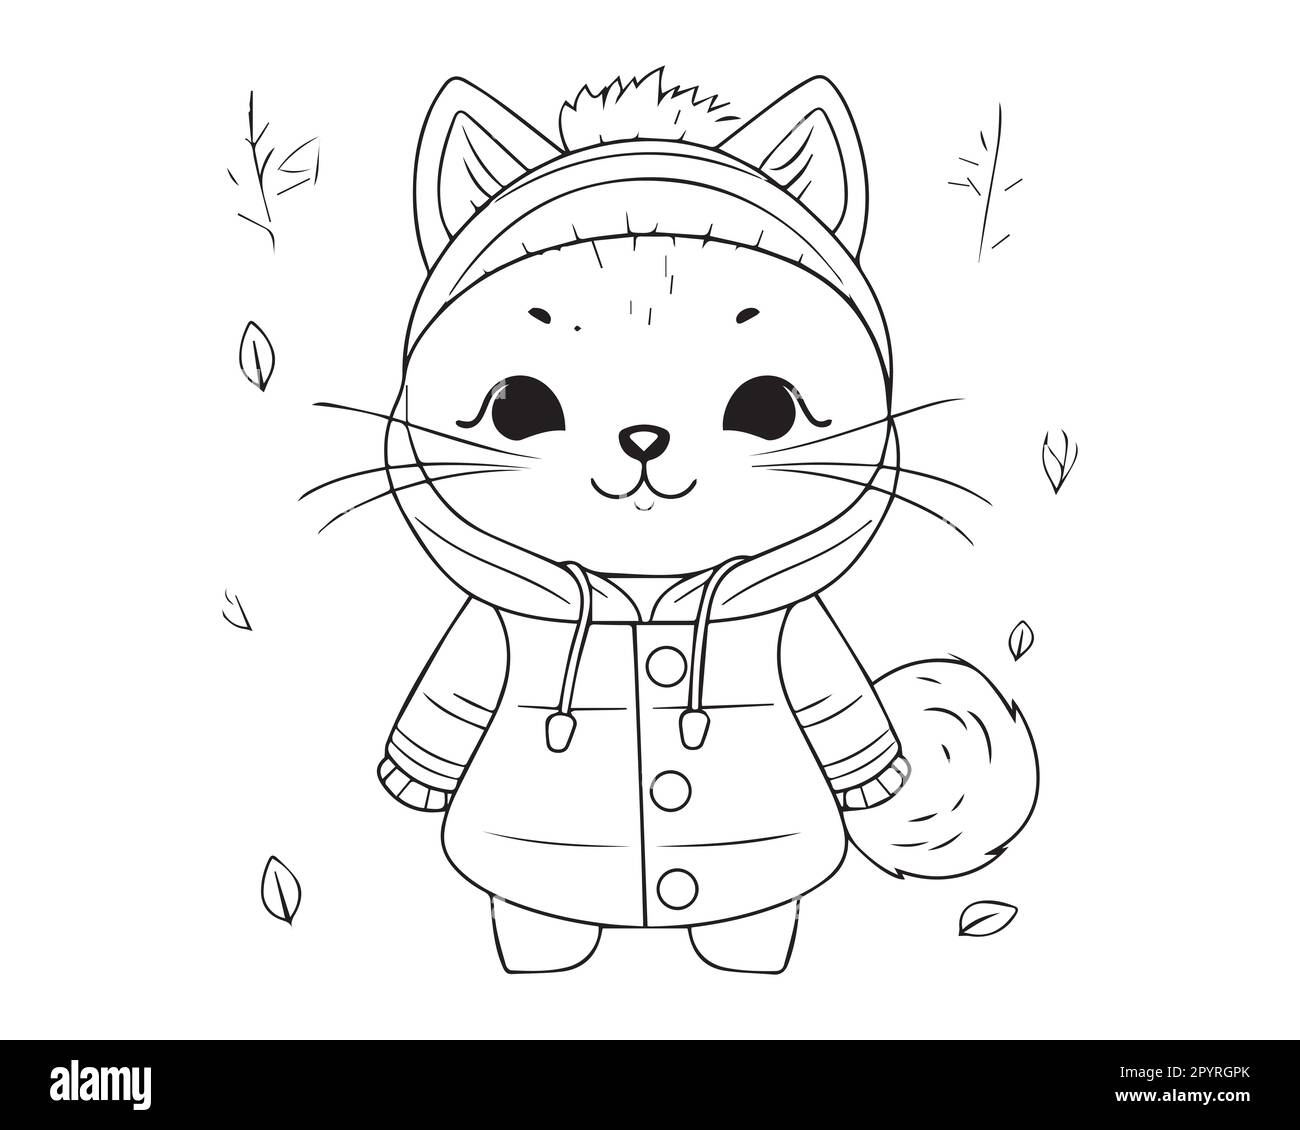 Vector coloring book or page for kids. black and white cat. Silhouette coloring page.Free vector hand-drawn cat outline illustration Stock Vector